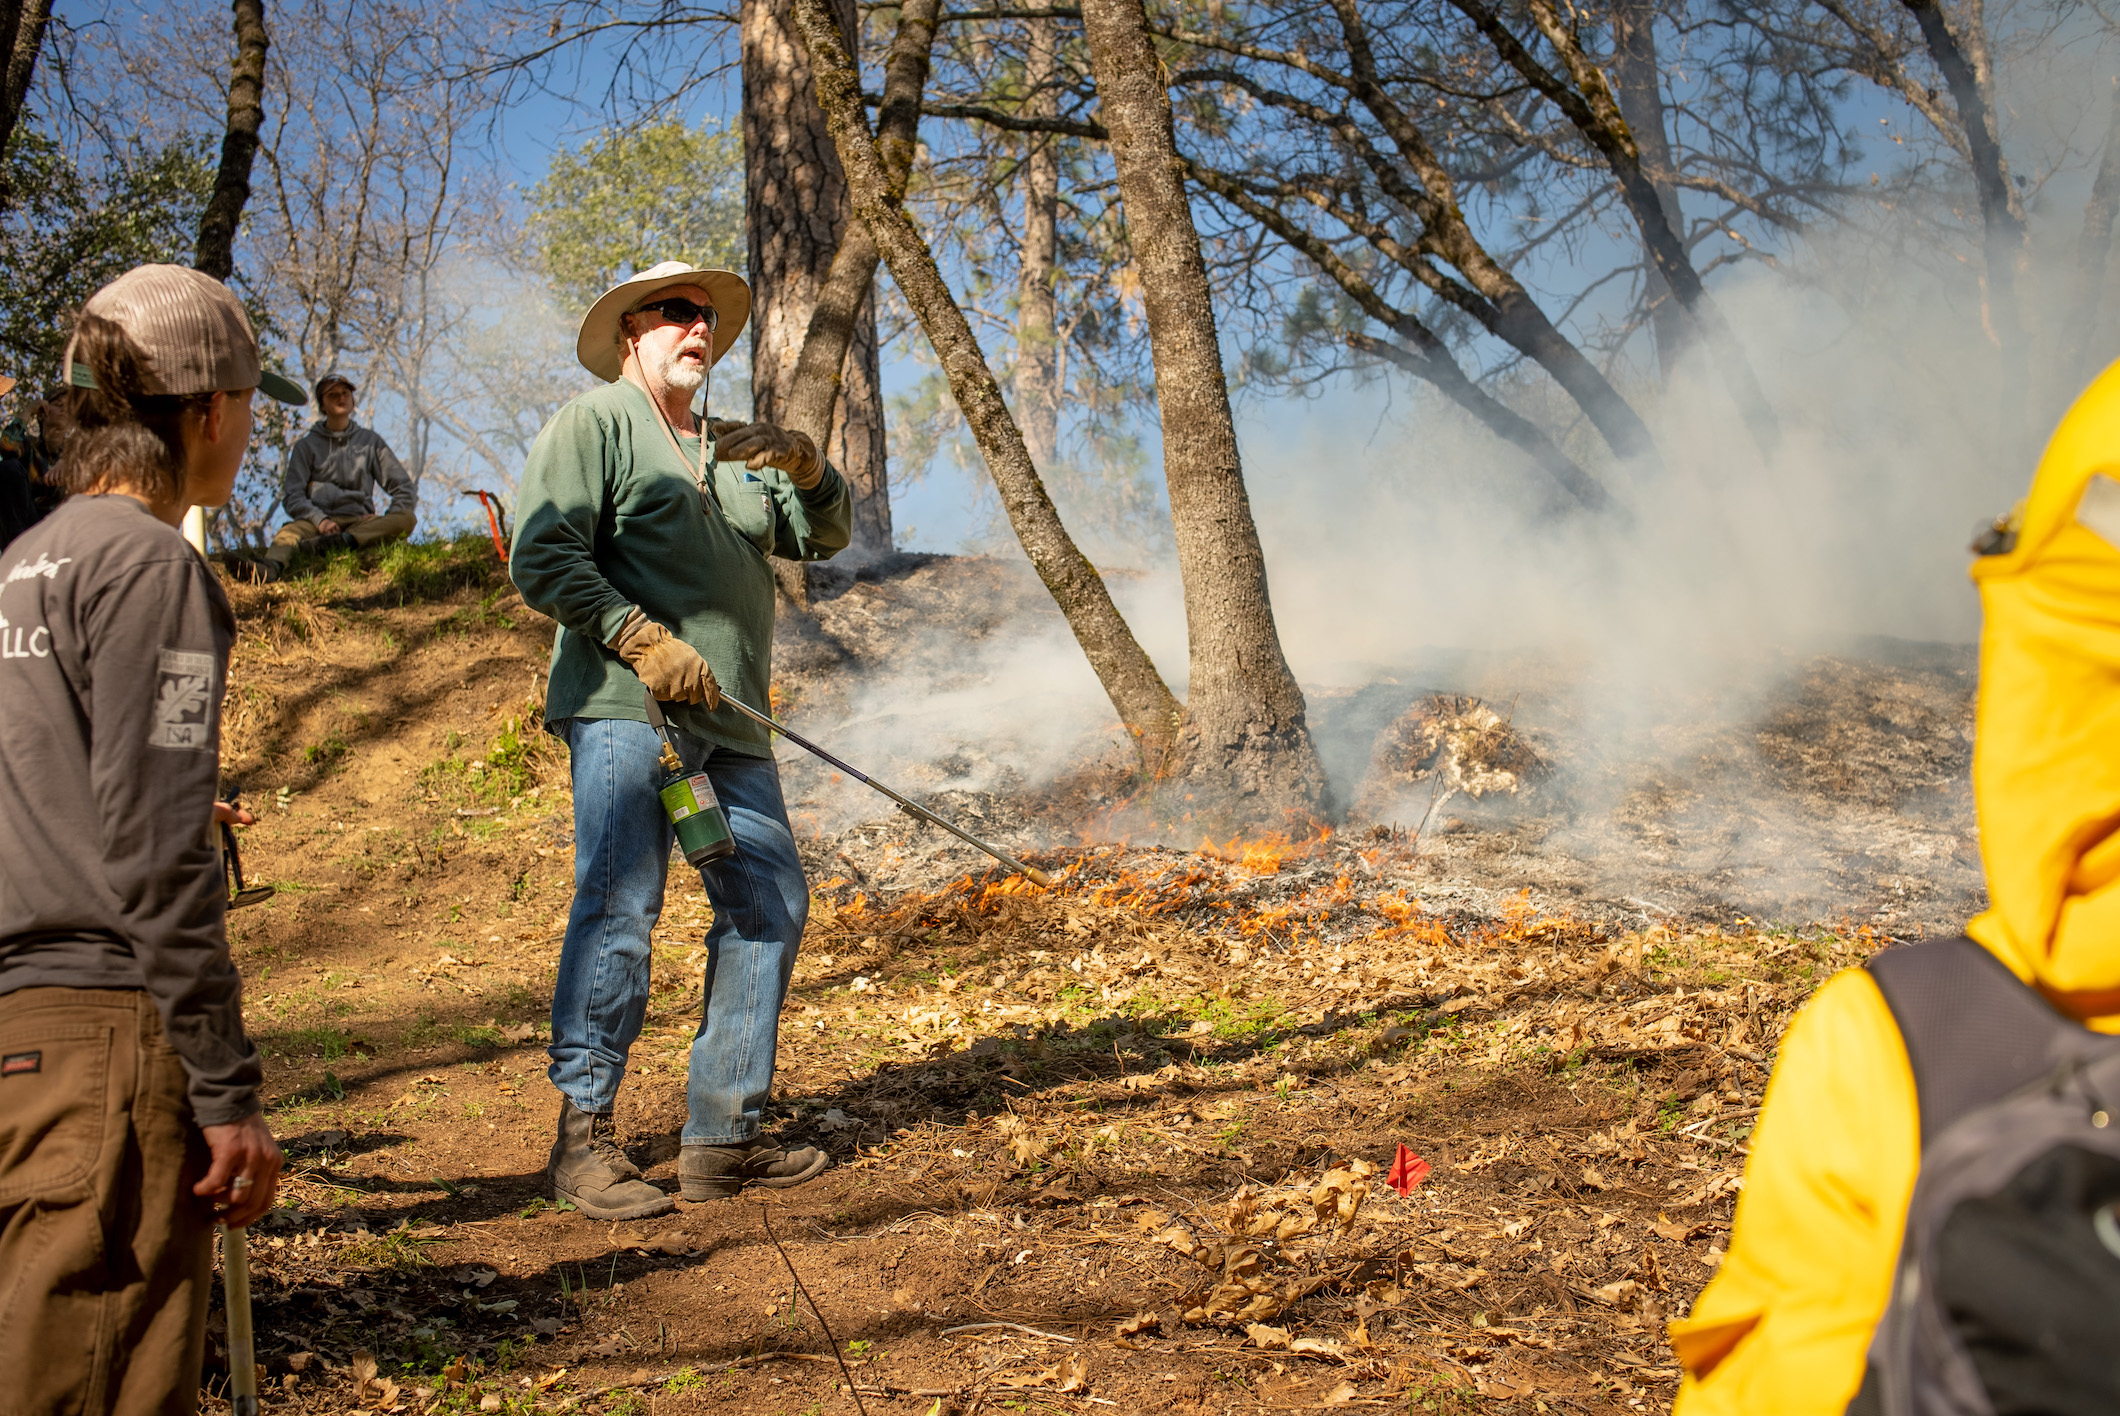 Retired Cal Fire battalion chief Chris Paulus gives pointers about conducting safe prescribed burns. (Tim McConville/UC Davis)